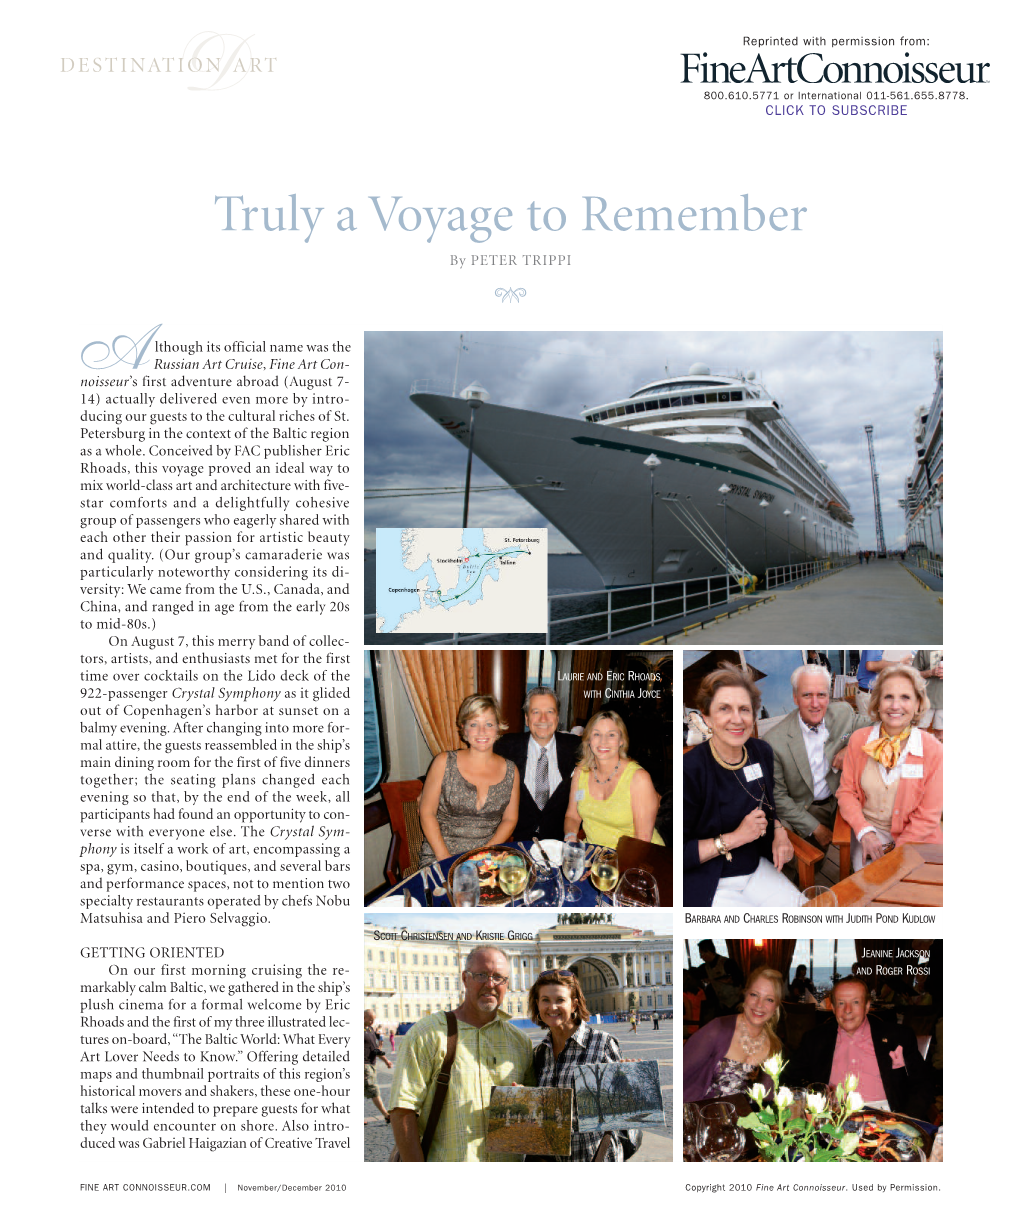 Truly a Voyage to Remember by PETER TRIPPI GH